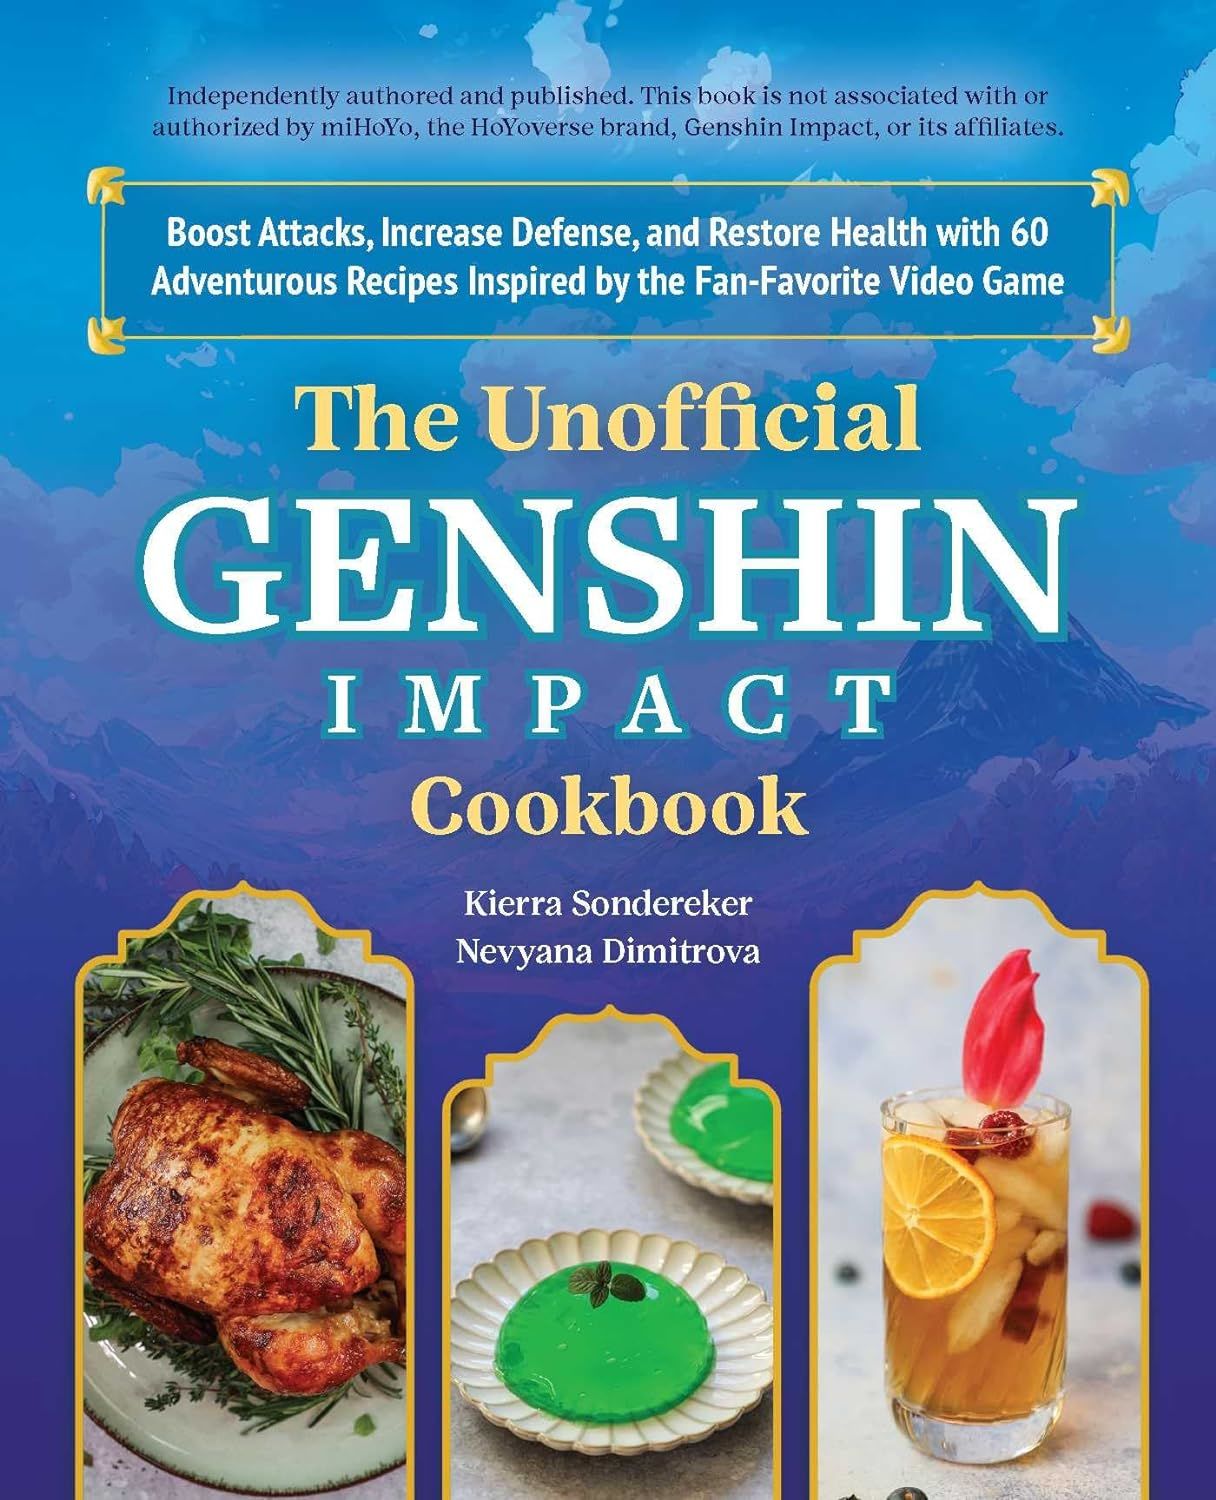 The Unofficial Genshin Impact Cookbook: Boost Attacks, Increase Defense, and Restore Your Health with 60 Adventurous Recipes Inspired by the Fan-Favorite